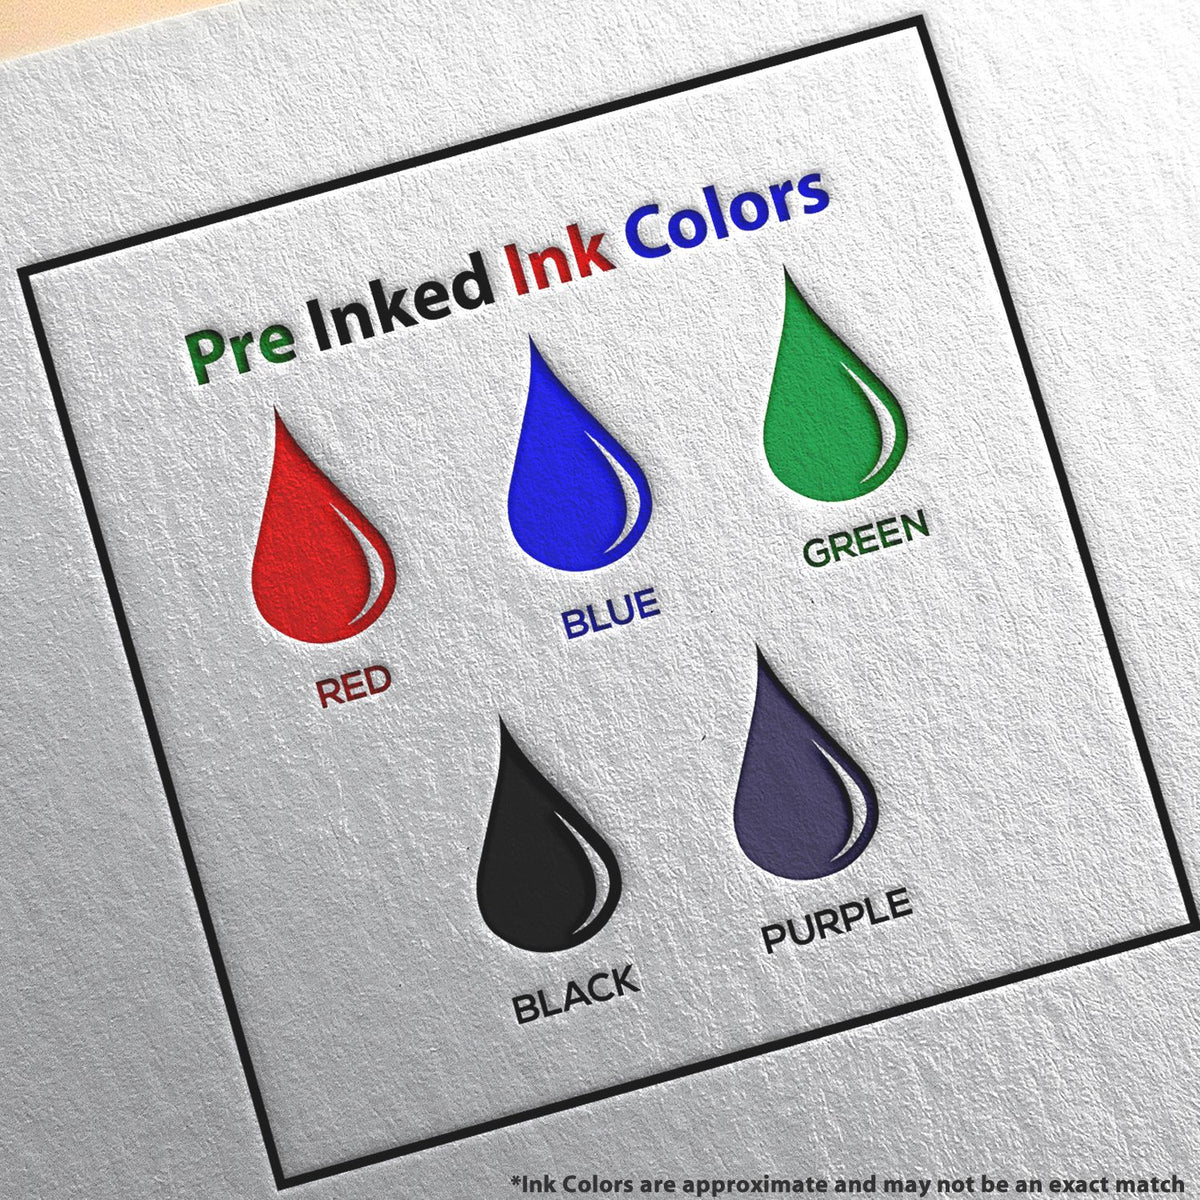 A picture showing the different ink colors or hues available for the Premium MaxLight Pre-Inked Indiana Engineering Stamp product.